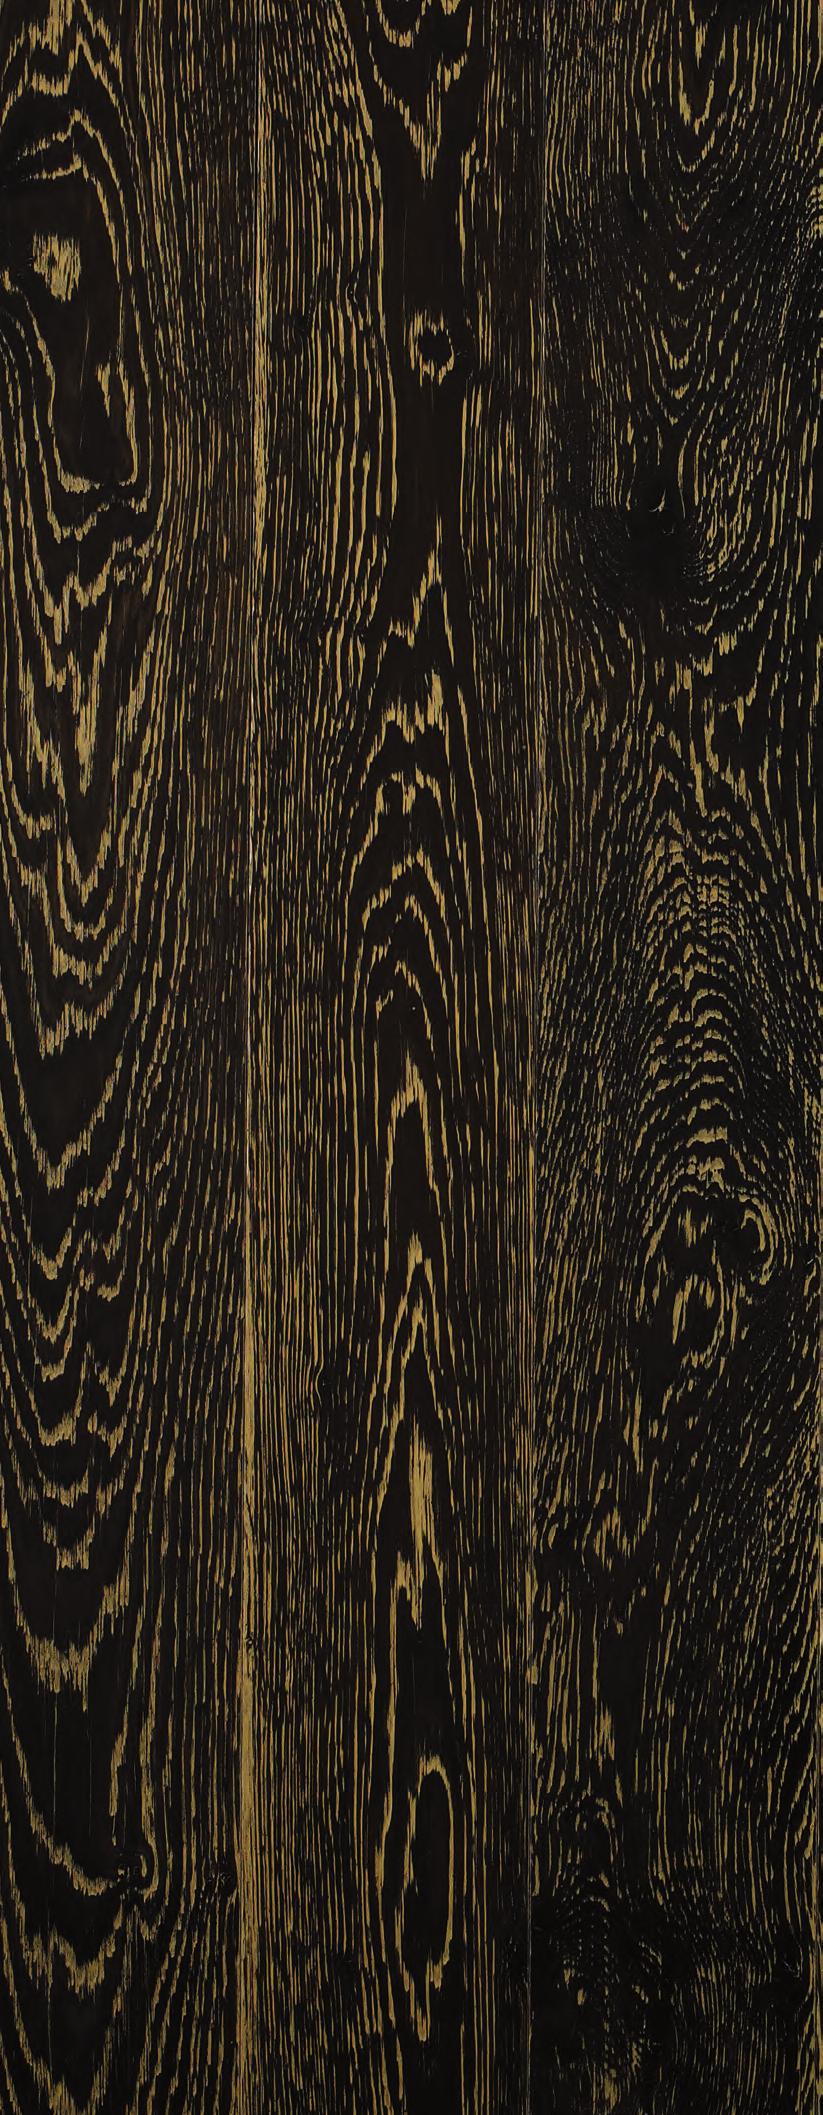 colours within the grain of the wood. Lighter tones can be seen along the line of the grain and in the sapwood.